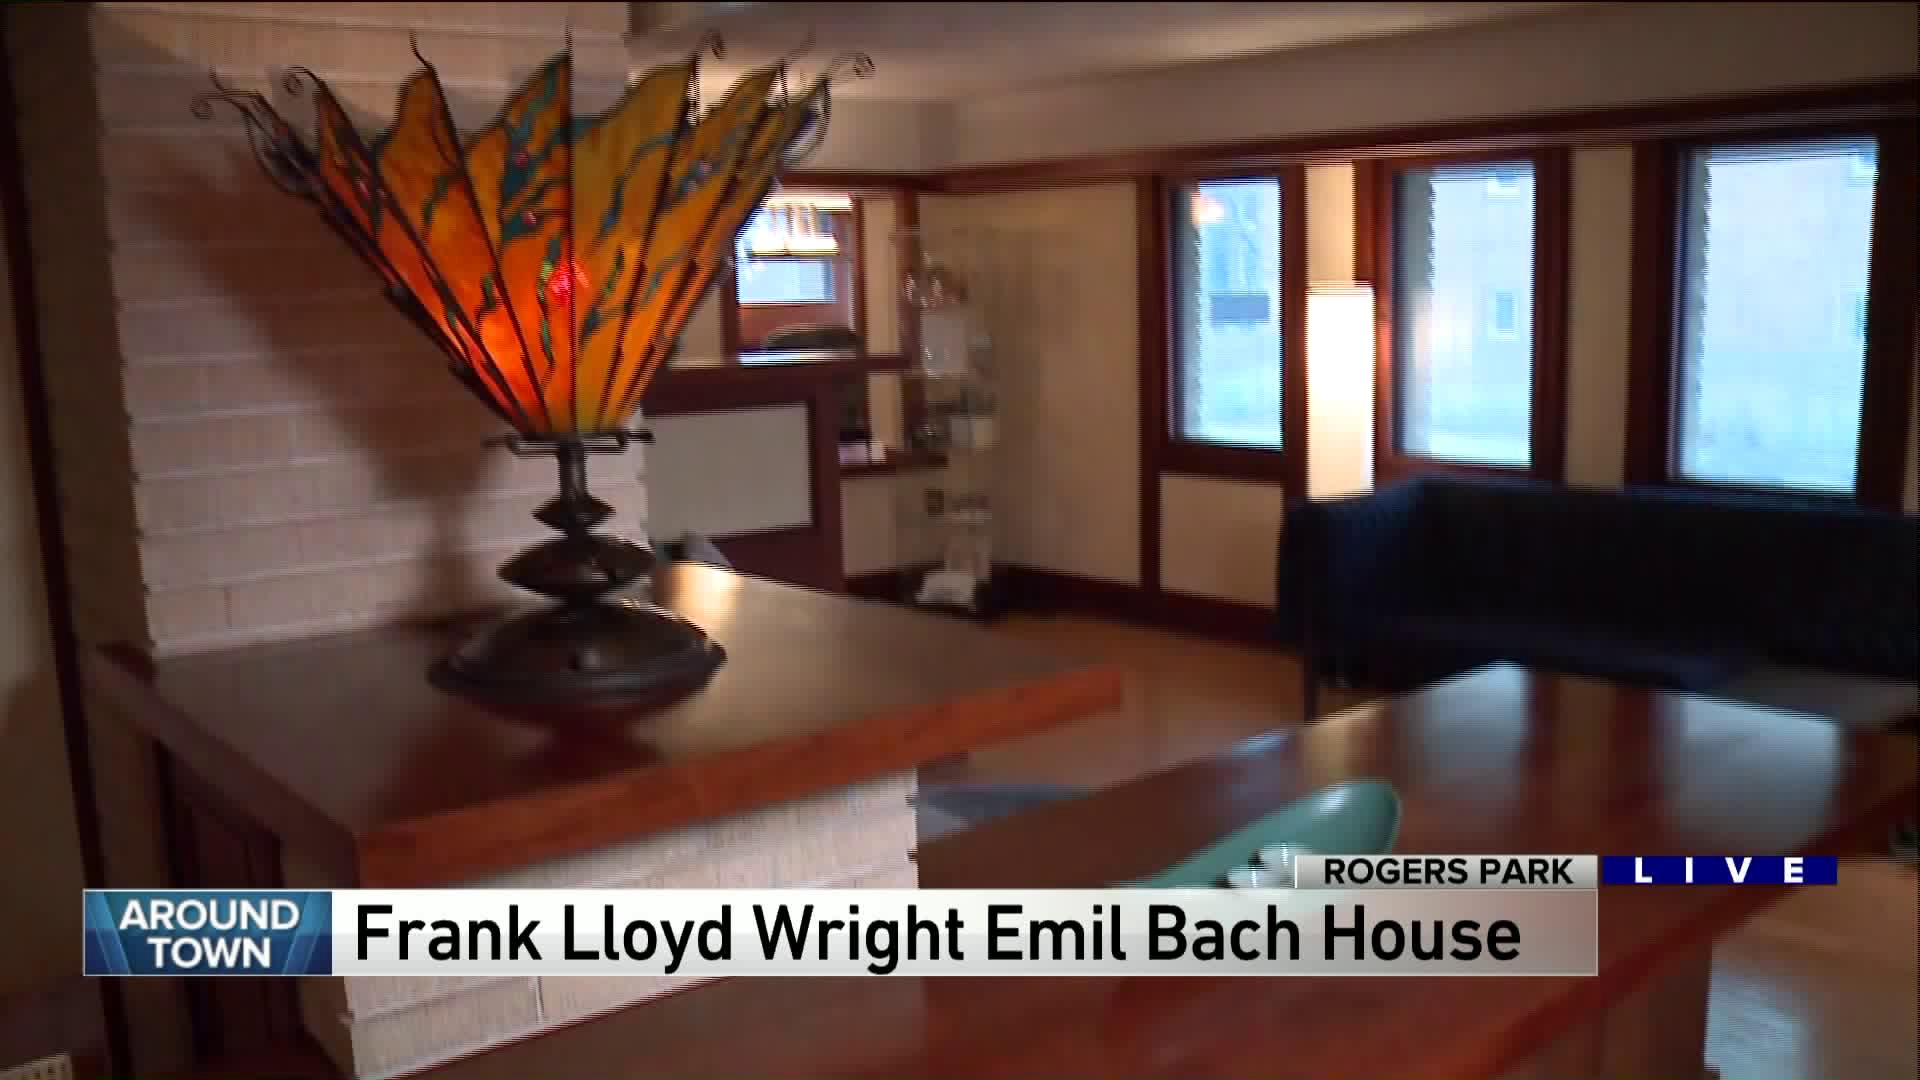 Around Town checks out Frank Lloyd Wright’s Emil Bach House